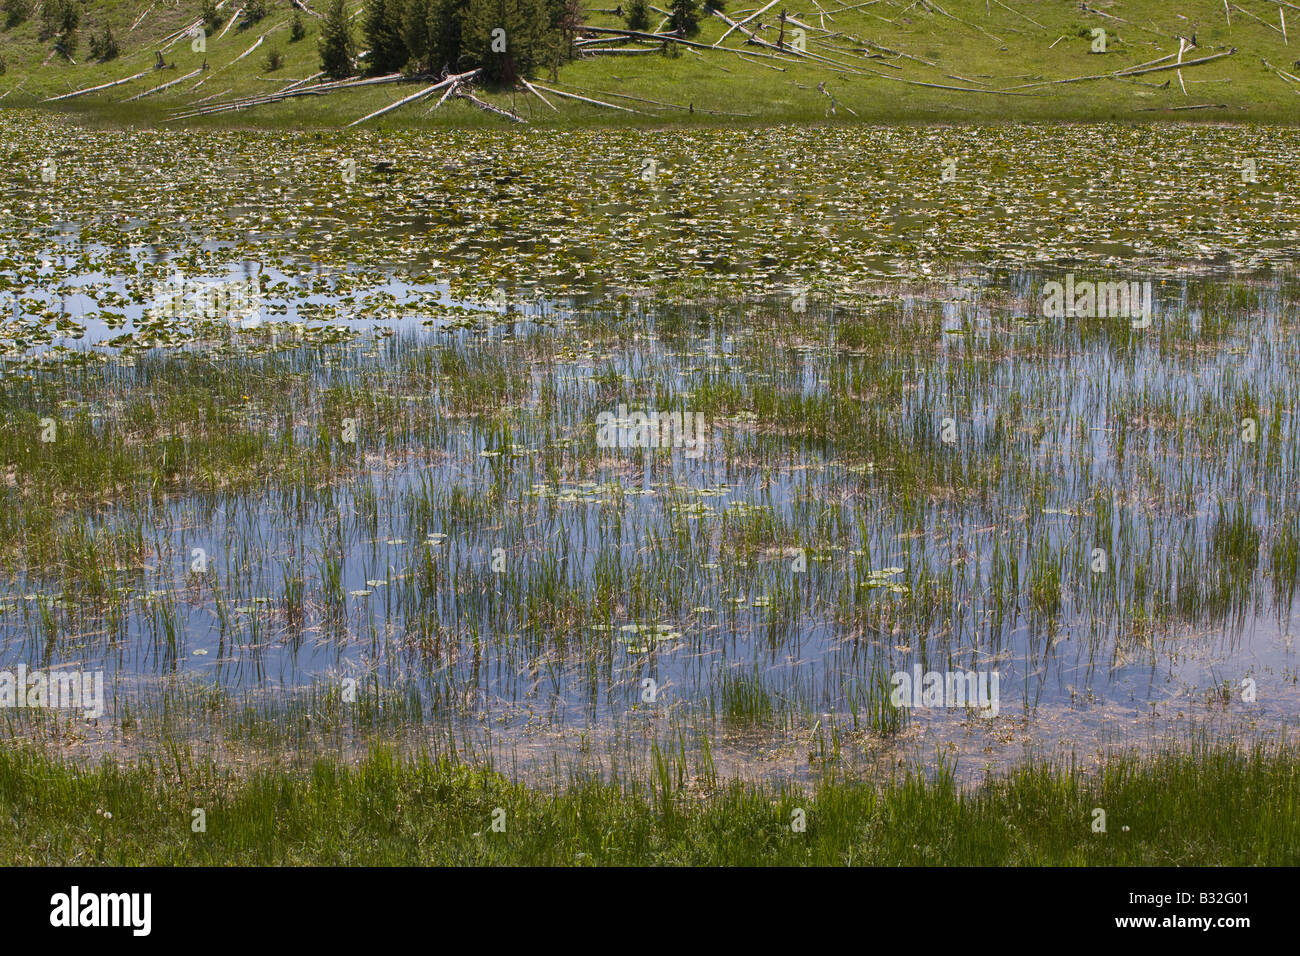 A LILY POND in the IMPERIAL BASIN YELLOWSTONE NATIONAL PARK WYOMING Stock Photo